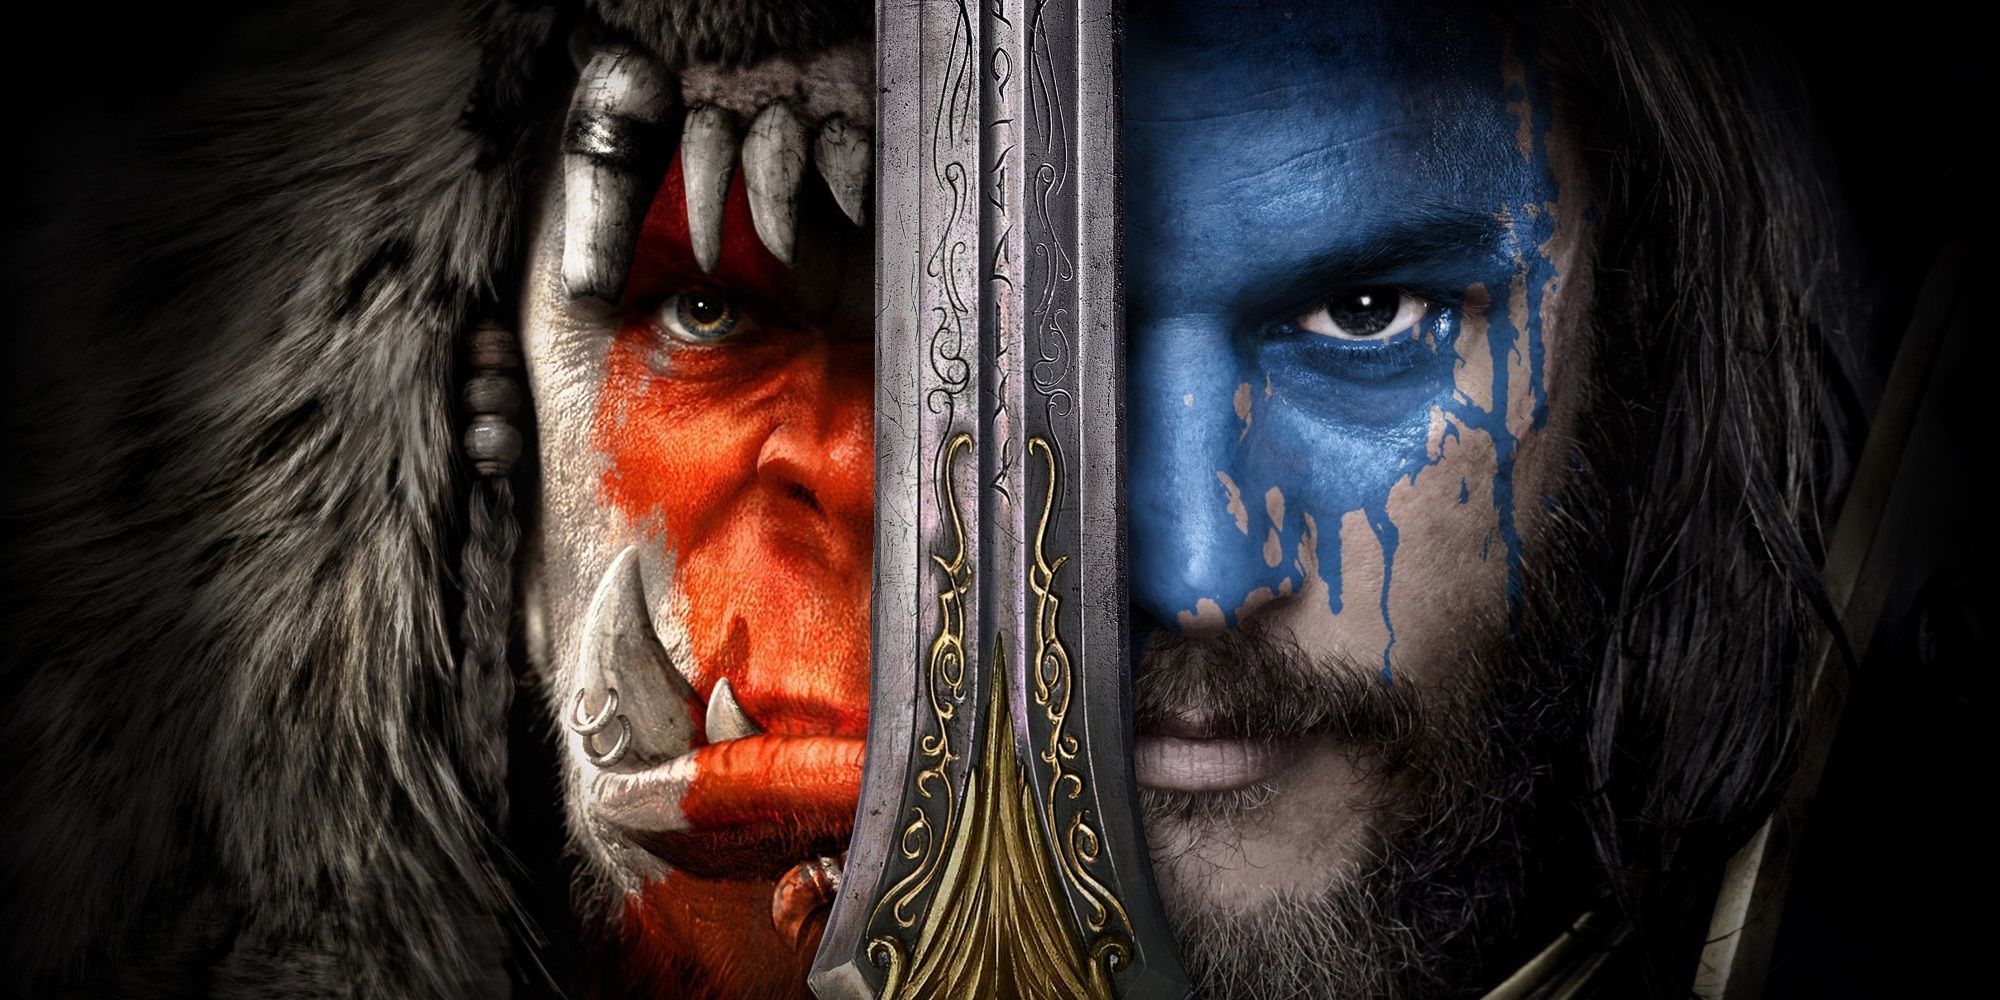 The Reason Why Warcraft 2 Could Skip U.S. Theaters